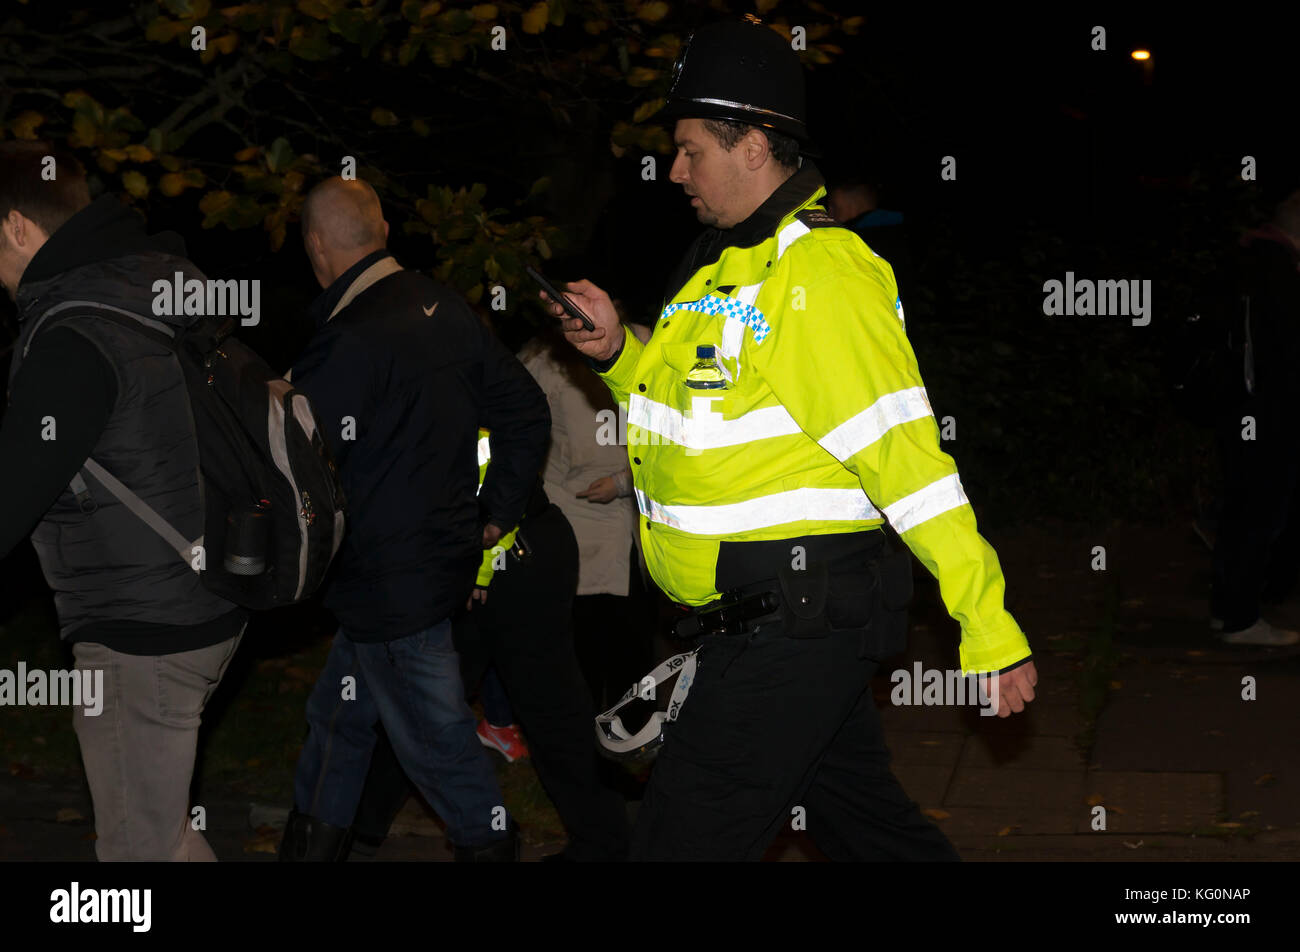 Policeman walking at a night time event in the UK. Stock Photo